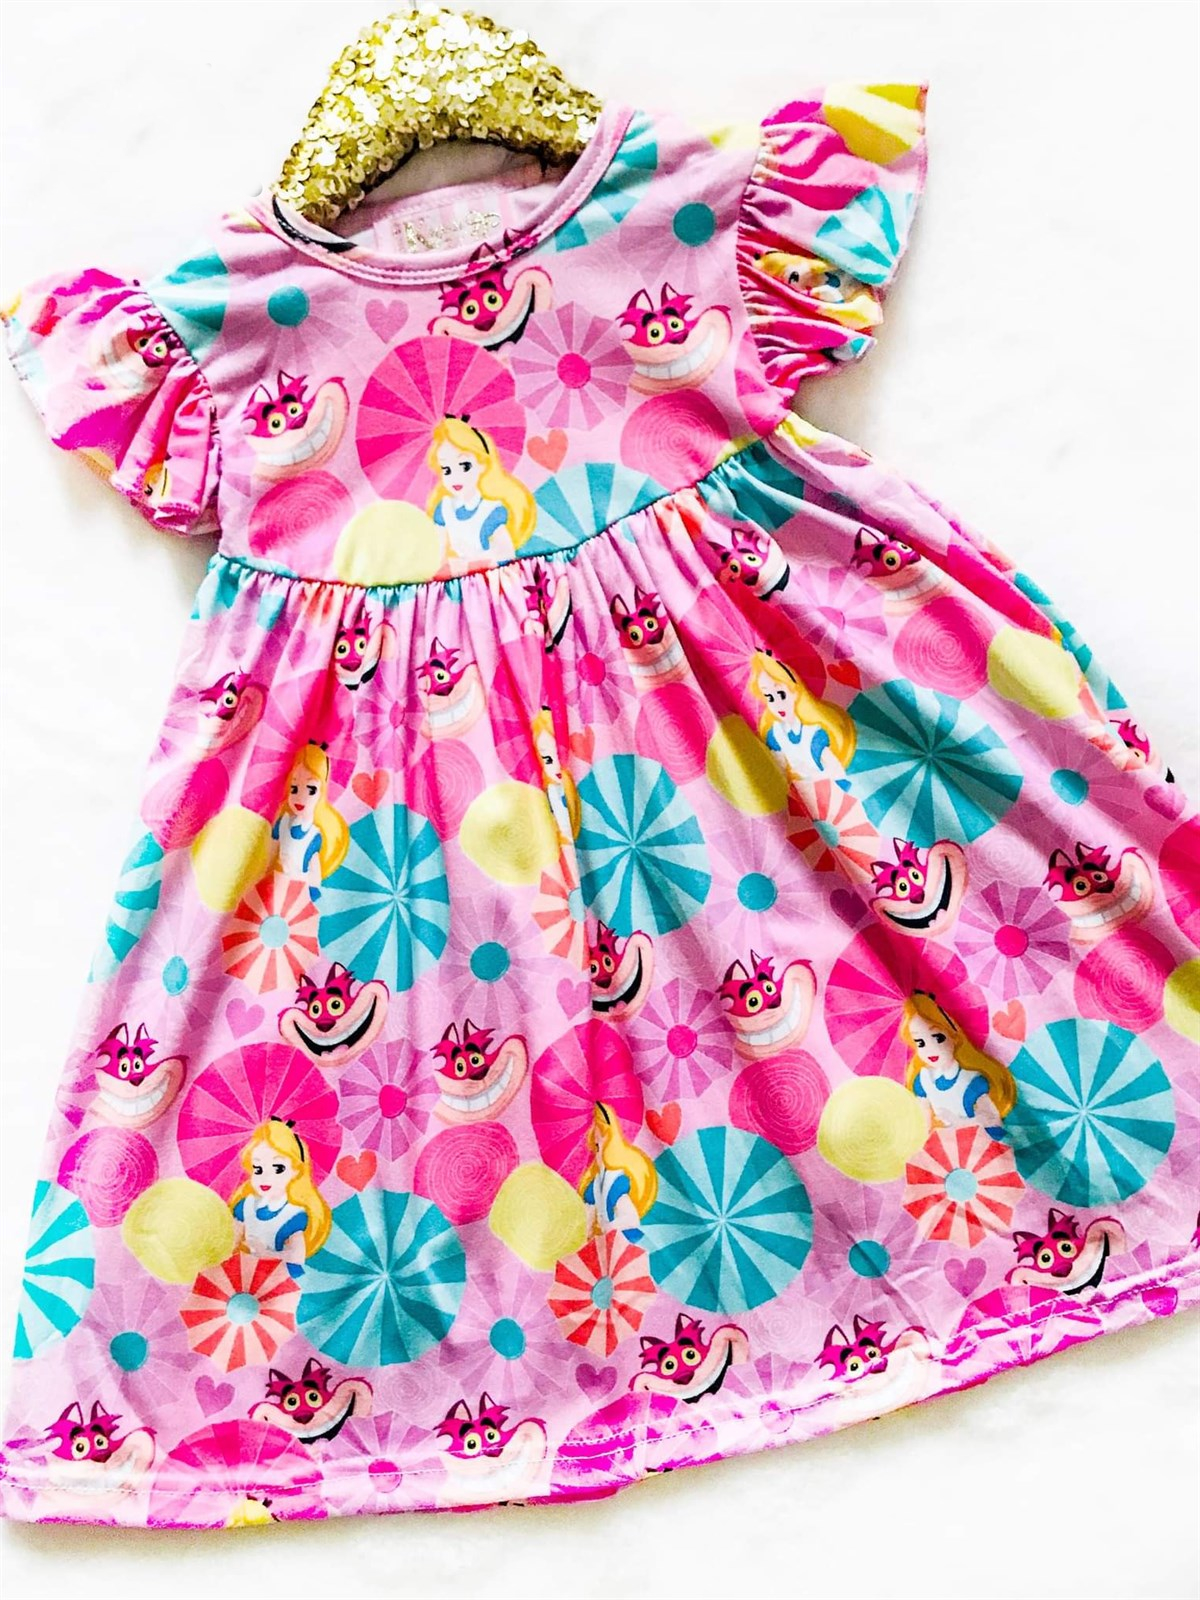 Girls Fun Character Dresses - Wonderland Smile Cat | Pink - colorful swirly circles that are pink, blue and yellow